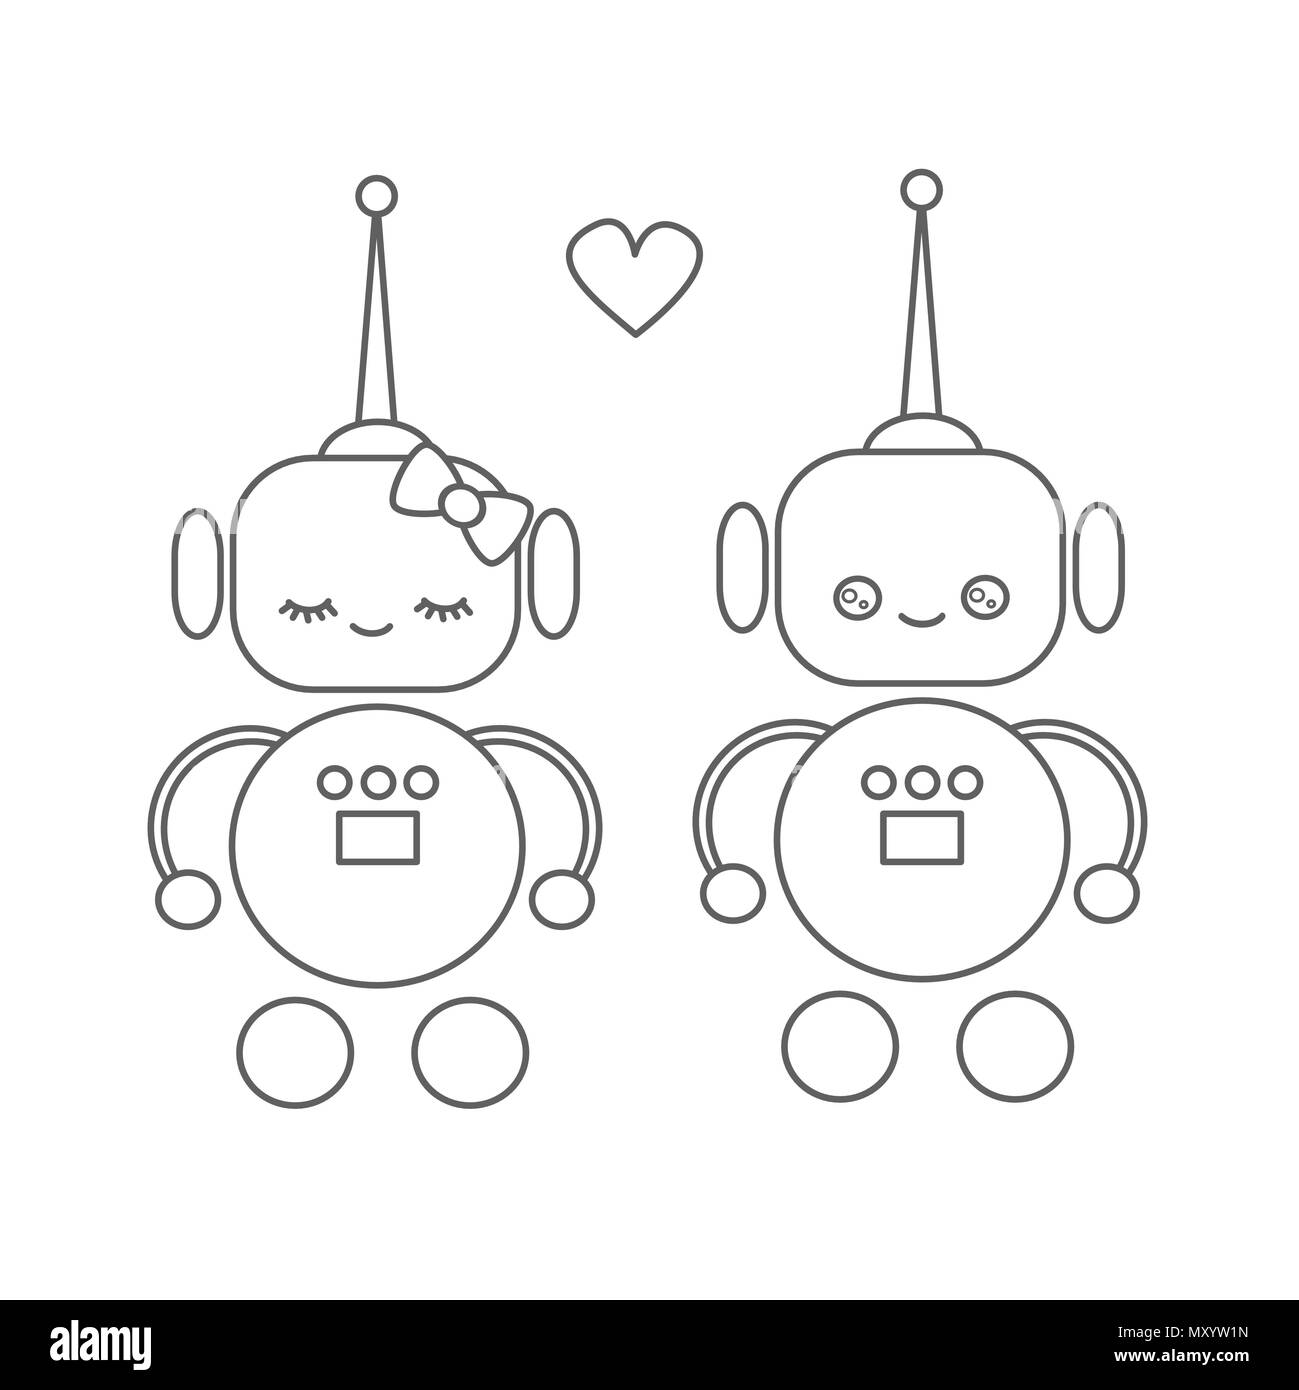 Robot love easy drawing - backiee